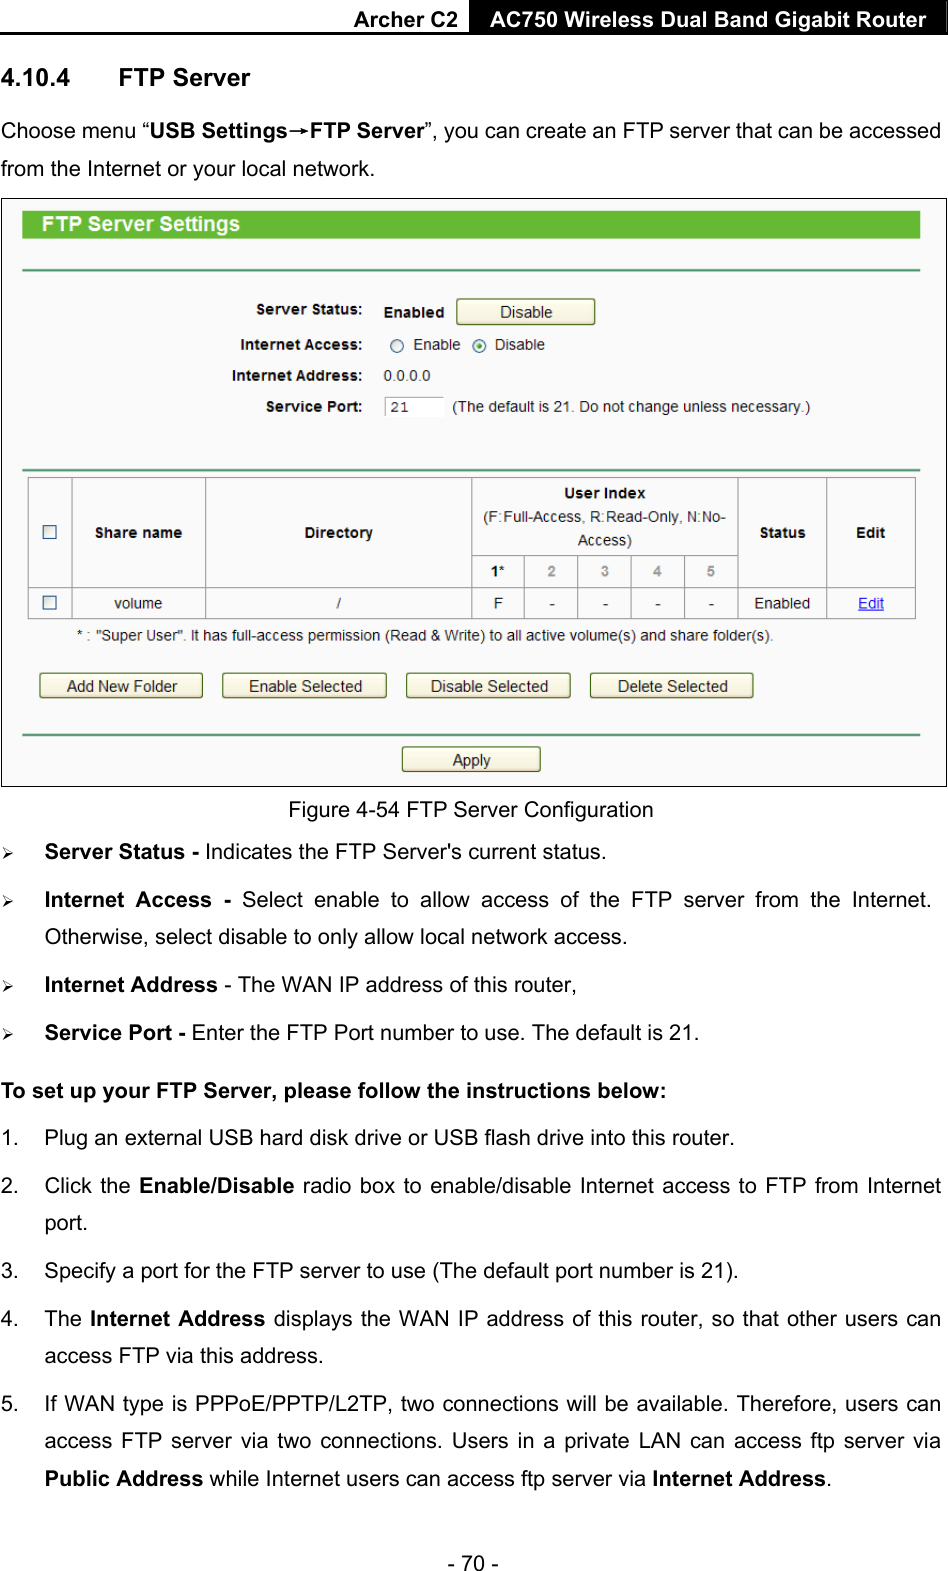 Archer C2 AC750 Wireless Dual Band Gigabit Router  - 70 - 4.10.4  FTP Server Choose menu “USB Settings→FTP Server”, you can create an FTP server that can be accessed from the Internet or your local network.    Figure 4-54 FTP Server Configuration  Server Status - Indicates the FTP Server&apos;s current status.    Internet Access - Select enable to allow access of the FTP server from the Internet. Otherwise, select disable to only allow local network access.    Internet Address - The WAN IP address of this router,  Service Port - Enter the FTP Port number to use. The default is 21.   To set up your FTP Server, please follow the instructions below:  1.  Plug an external USB hard disk drive or USB flash drive into this router.   2. Click the Enable/Disable radio box to enable/disable Internet access to FTP from Internet port.  3.  Specify a port for the FTP server to use (The default port number is 21).   4. The Internet Address displays the WAN IP address of this router, so that other users can access FTP via this address.   5.  If WAN type is PPPoE/PPTP/L2TP, two connections will be available. Therefore, users can access FTP server via two connections. Users in a private LAN can access ftp server via Public Address while Internet users can access ftp server via Internet Address.  